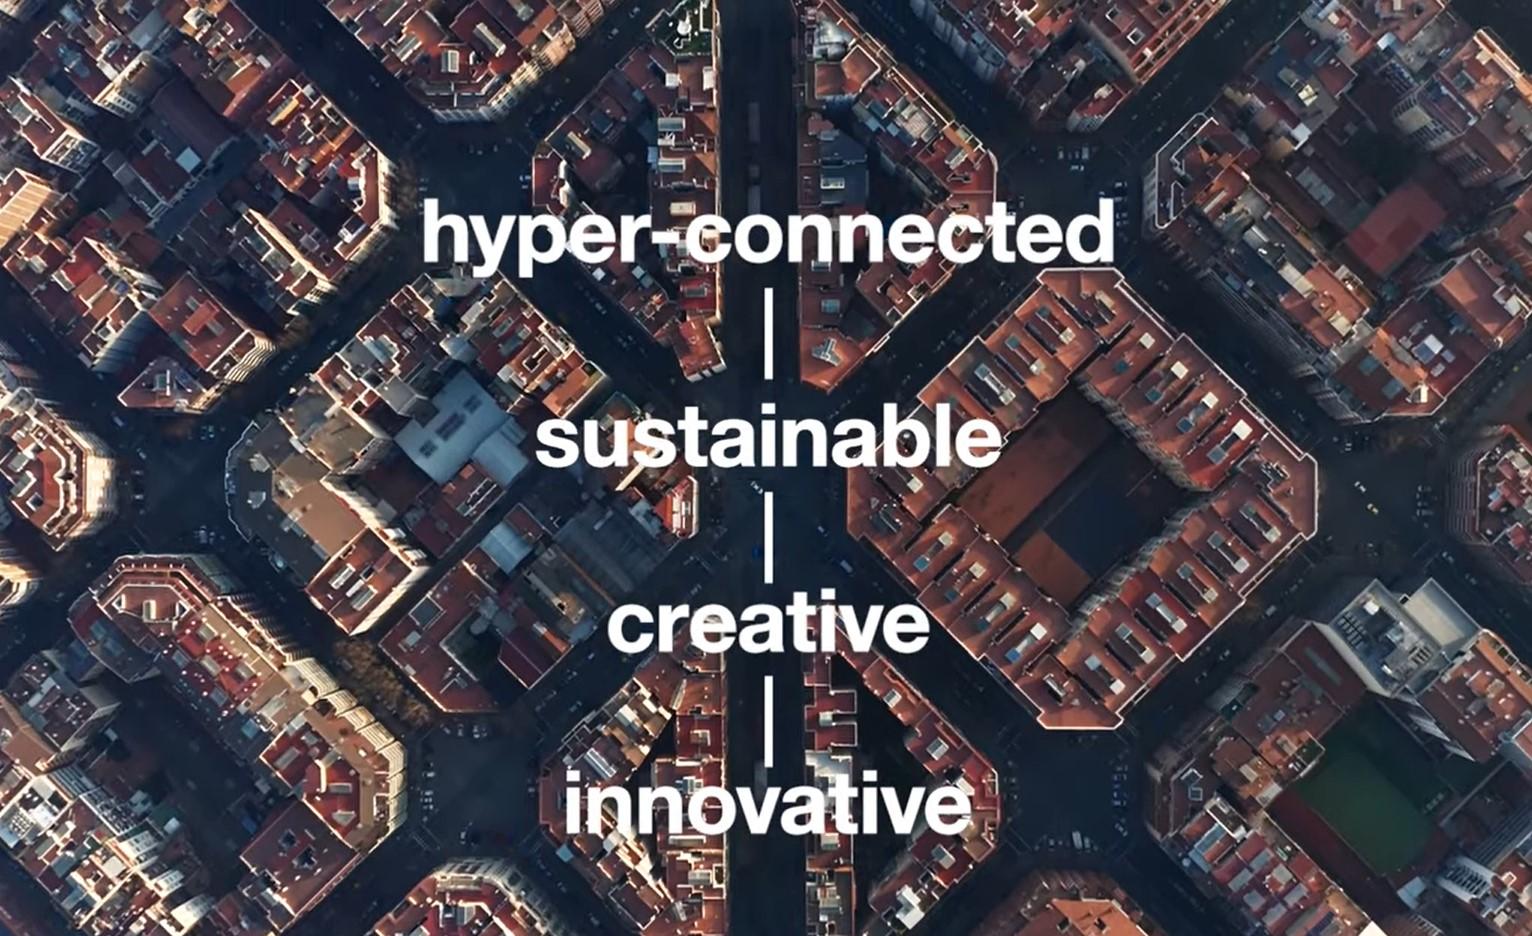 Hyoer-connected, sustainable, creative and innovative Barcelona